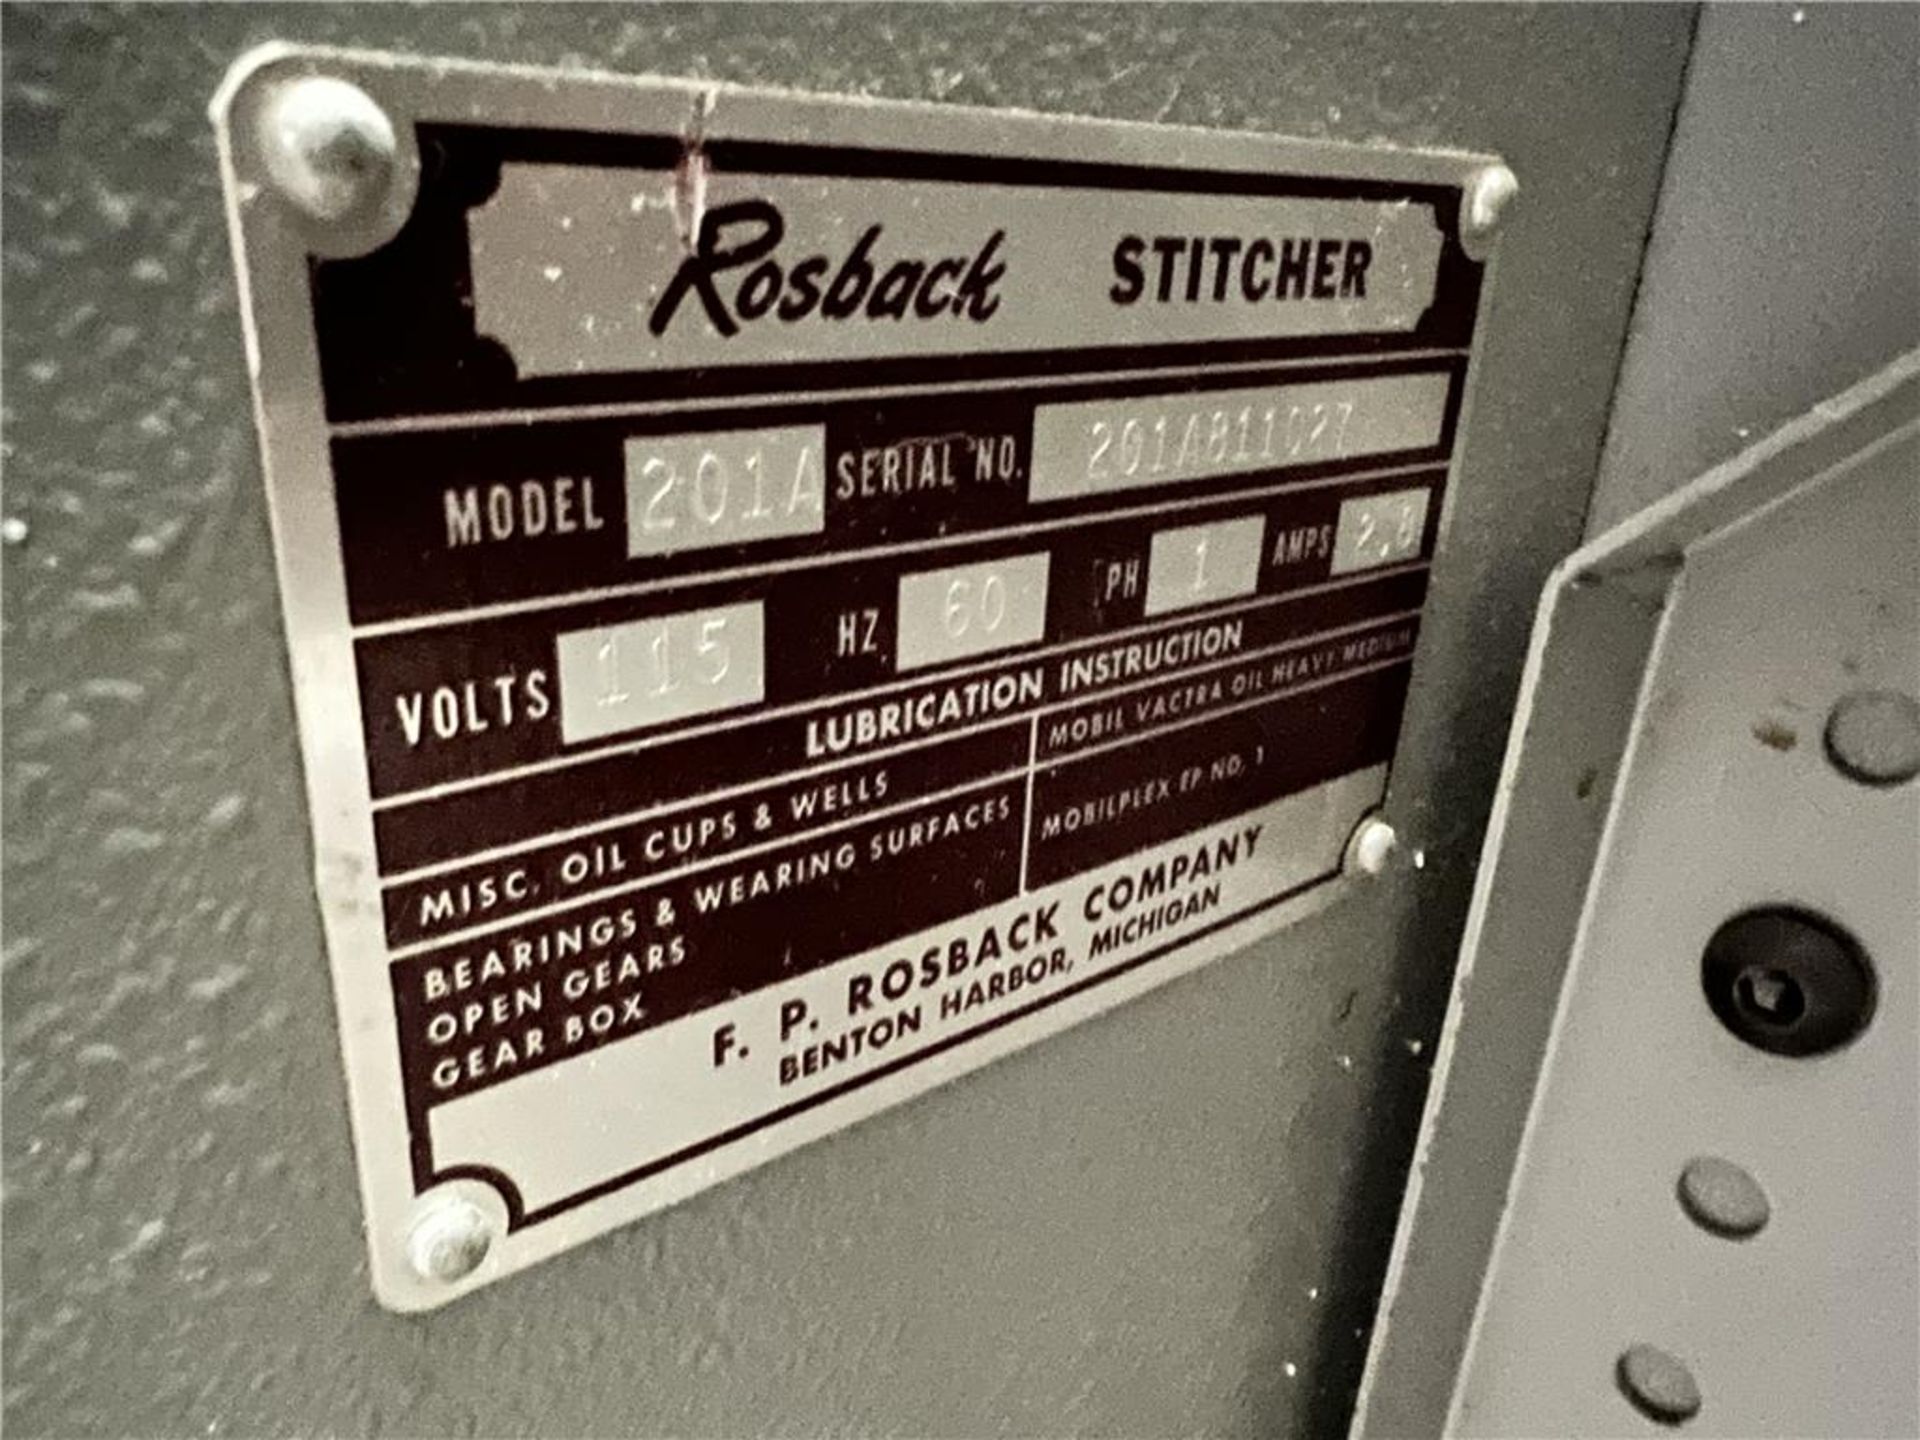 ROSBACK MODEL 201A AUTO-STITCHER, SINGLE PHASE, 115 VOLT, S/N: 201A801127 - Image 5 of 6